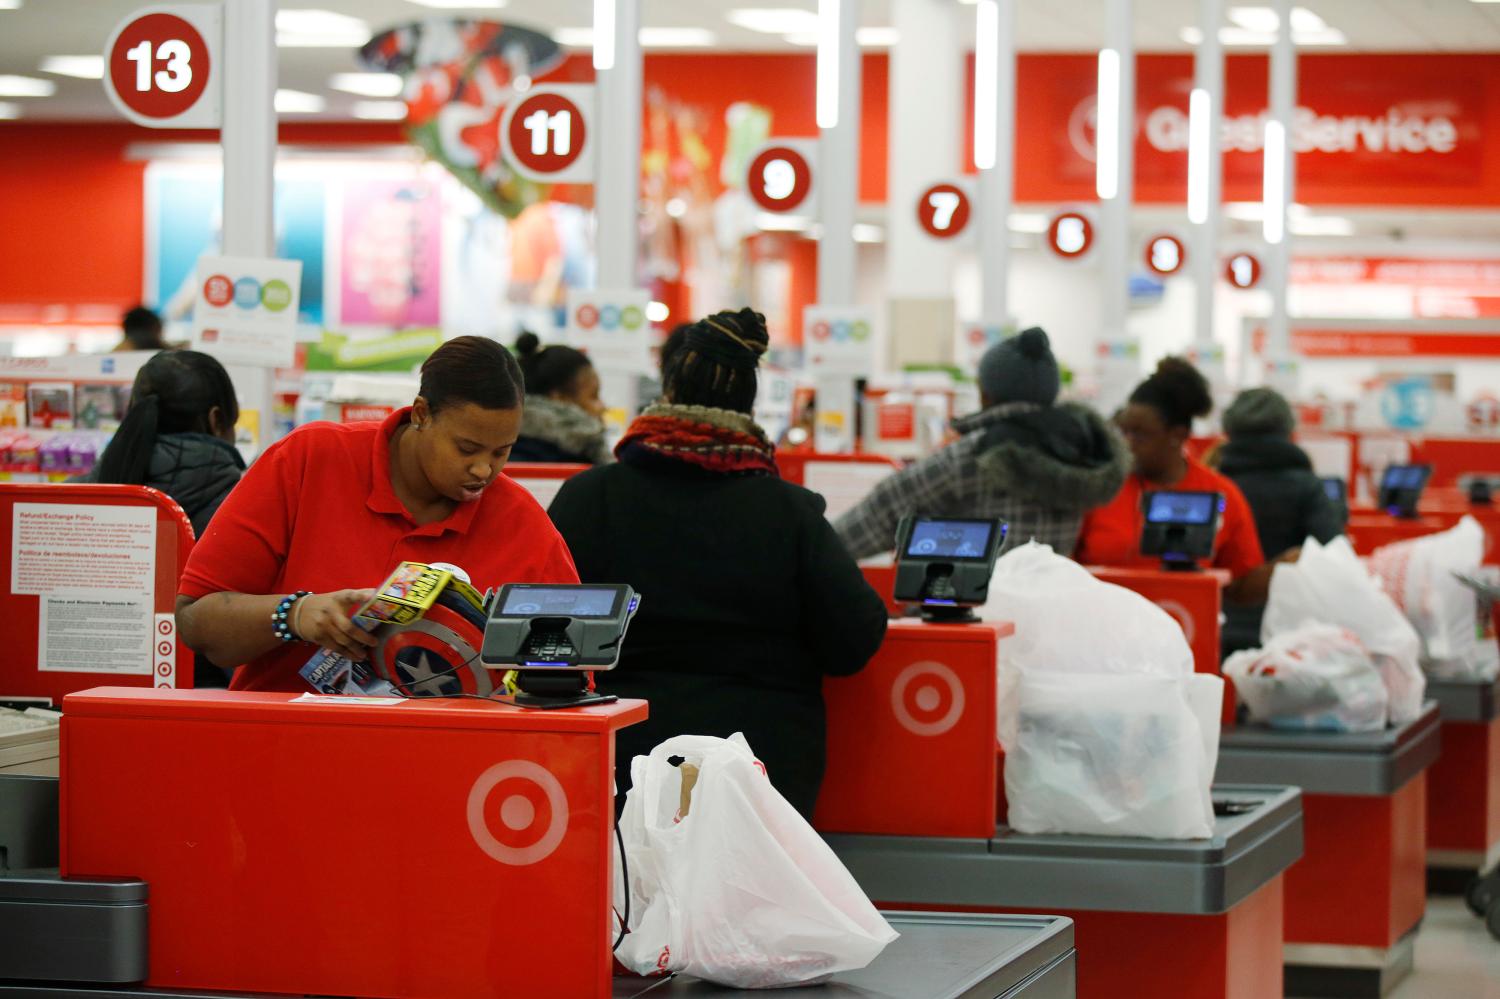 Cashiers check out for Thanksgiving Day shoppers at a Target store in Chicago, November 27, 2014. REUTERS/Andrew Nelles (UNITED STATES - Tags: BUSINESS SOCIETY) - GM1EABS0QE601